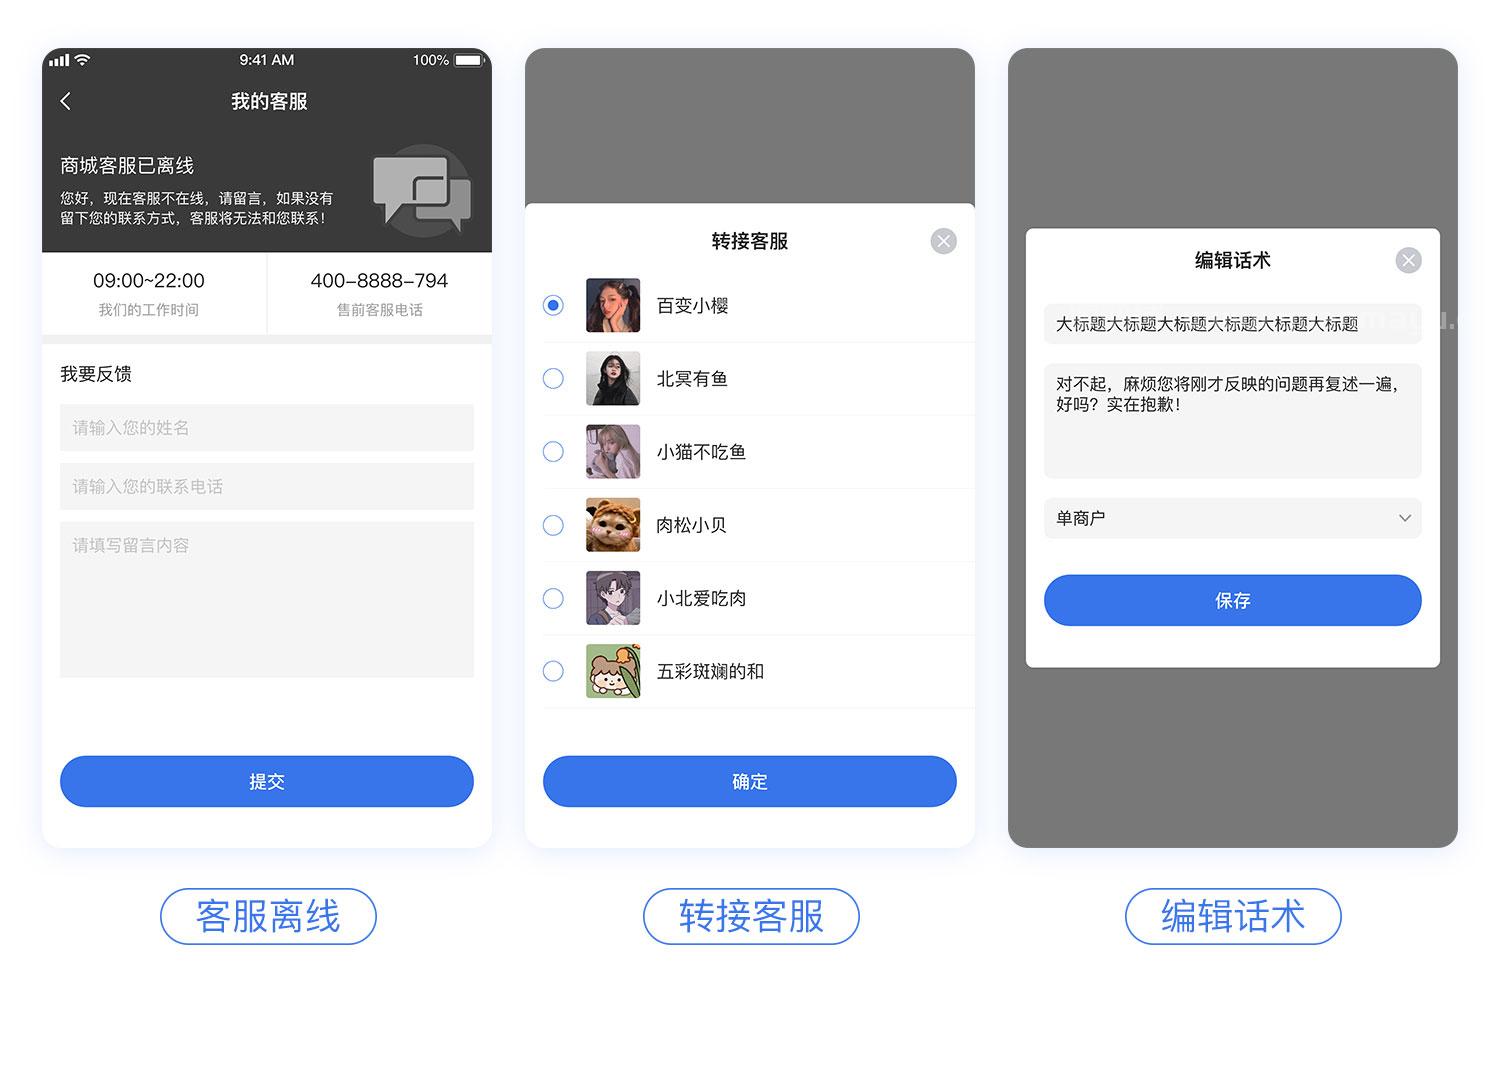 CRM Chat客服系统源码